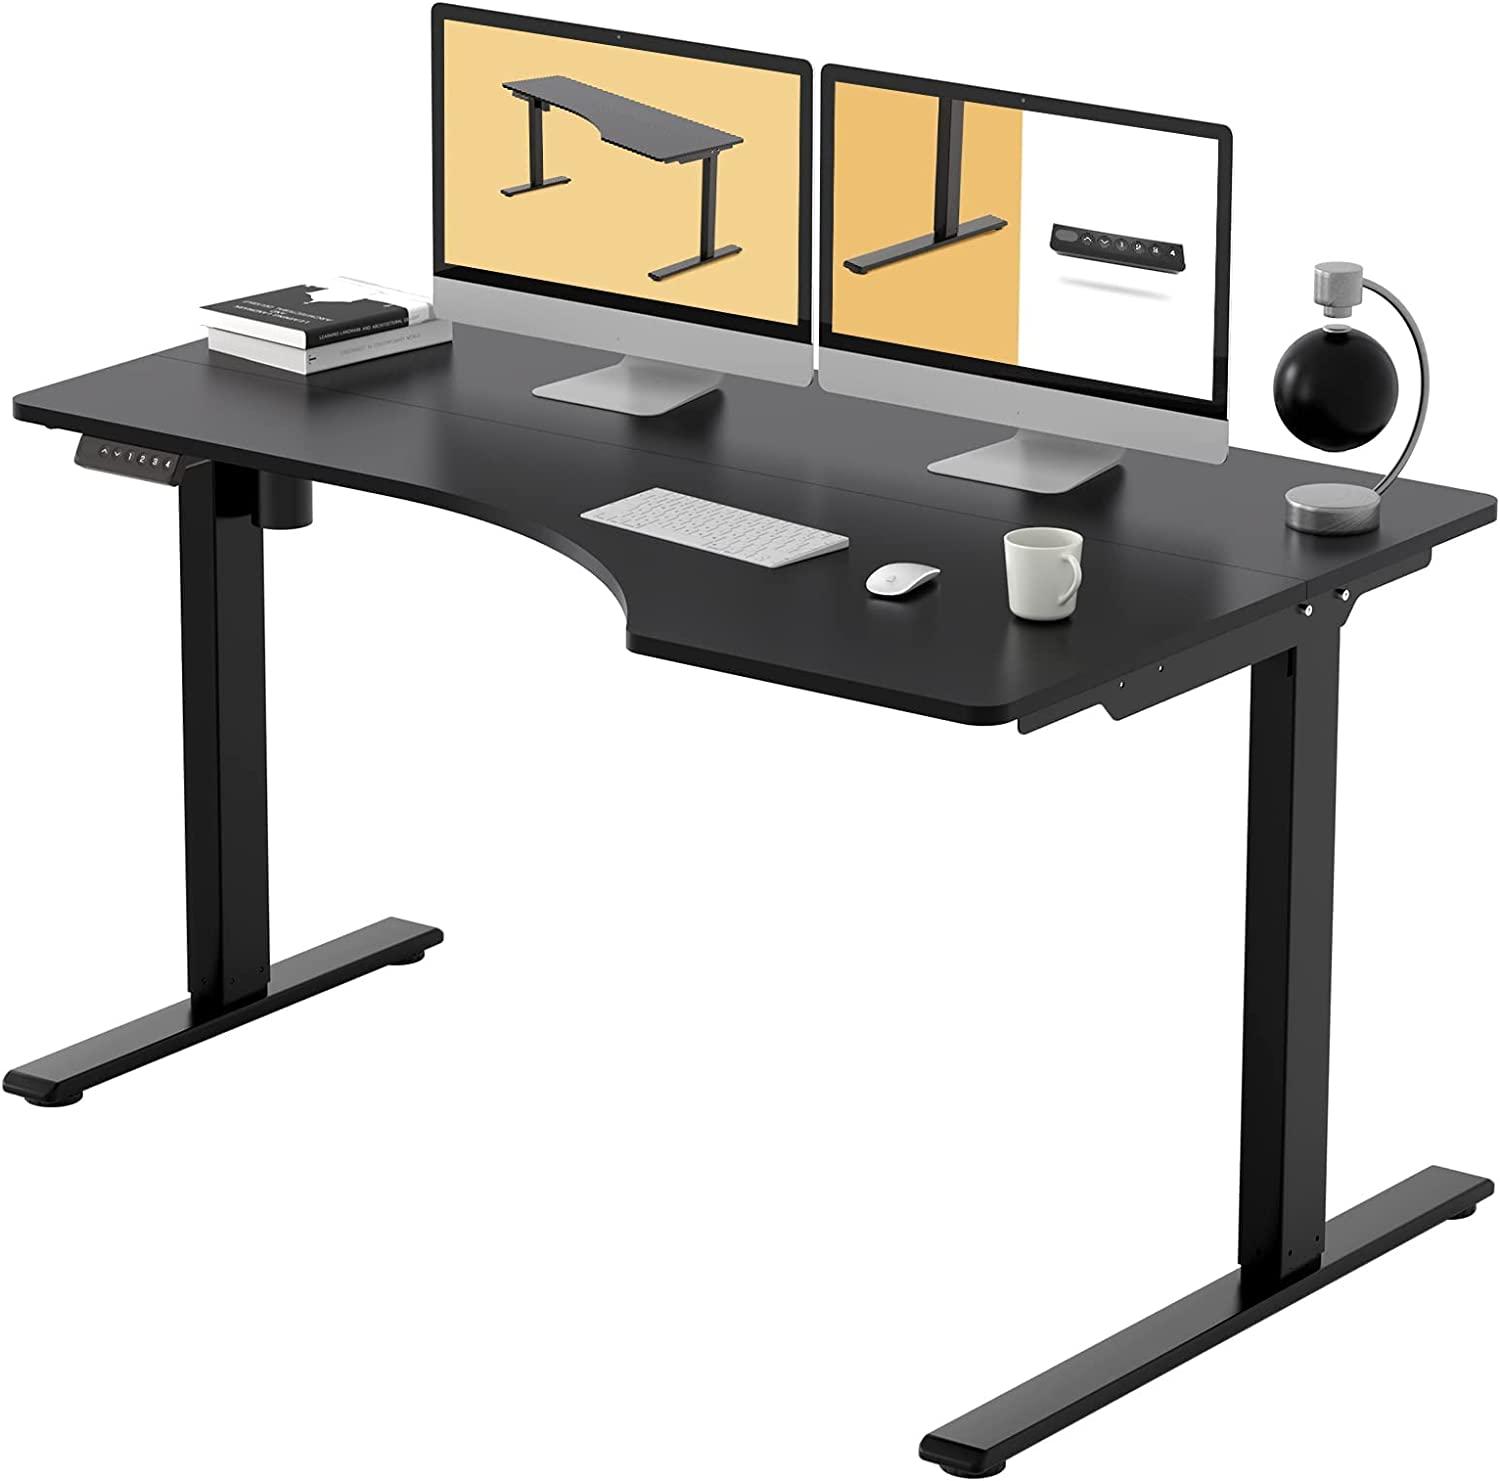 FlexiSpot 55in Seiffen L-shaped Standing Electric Desk for $189.99 Shipped